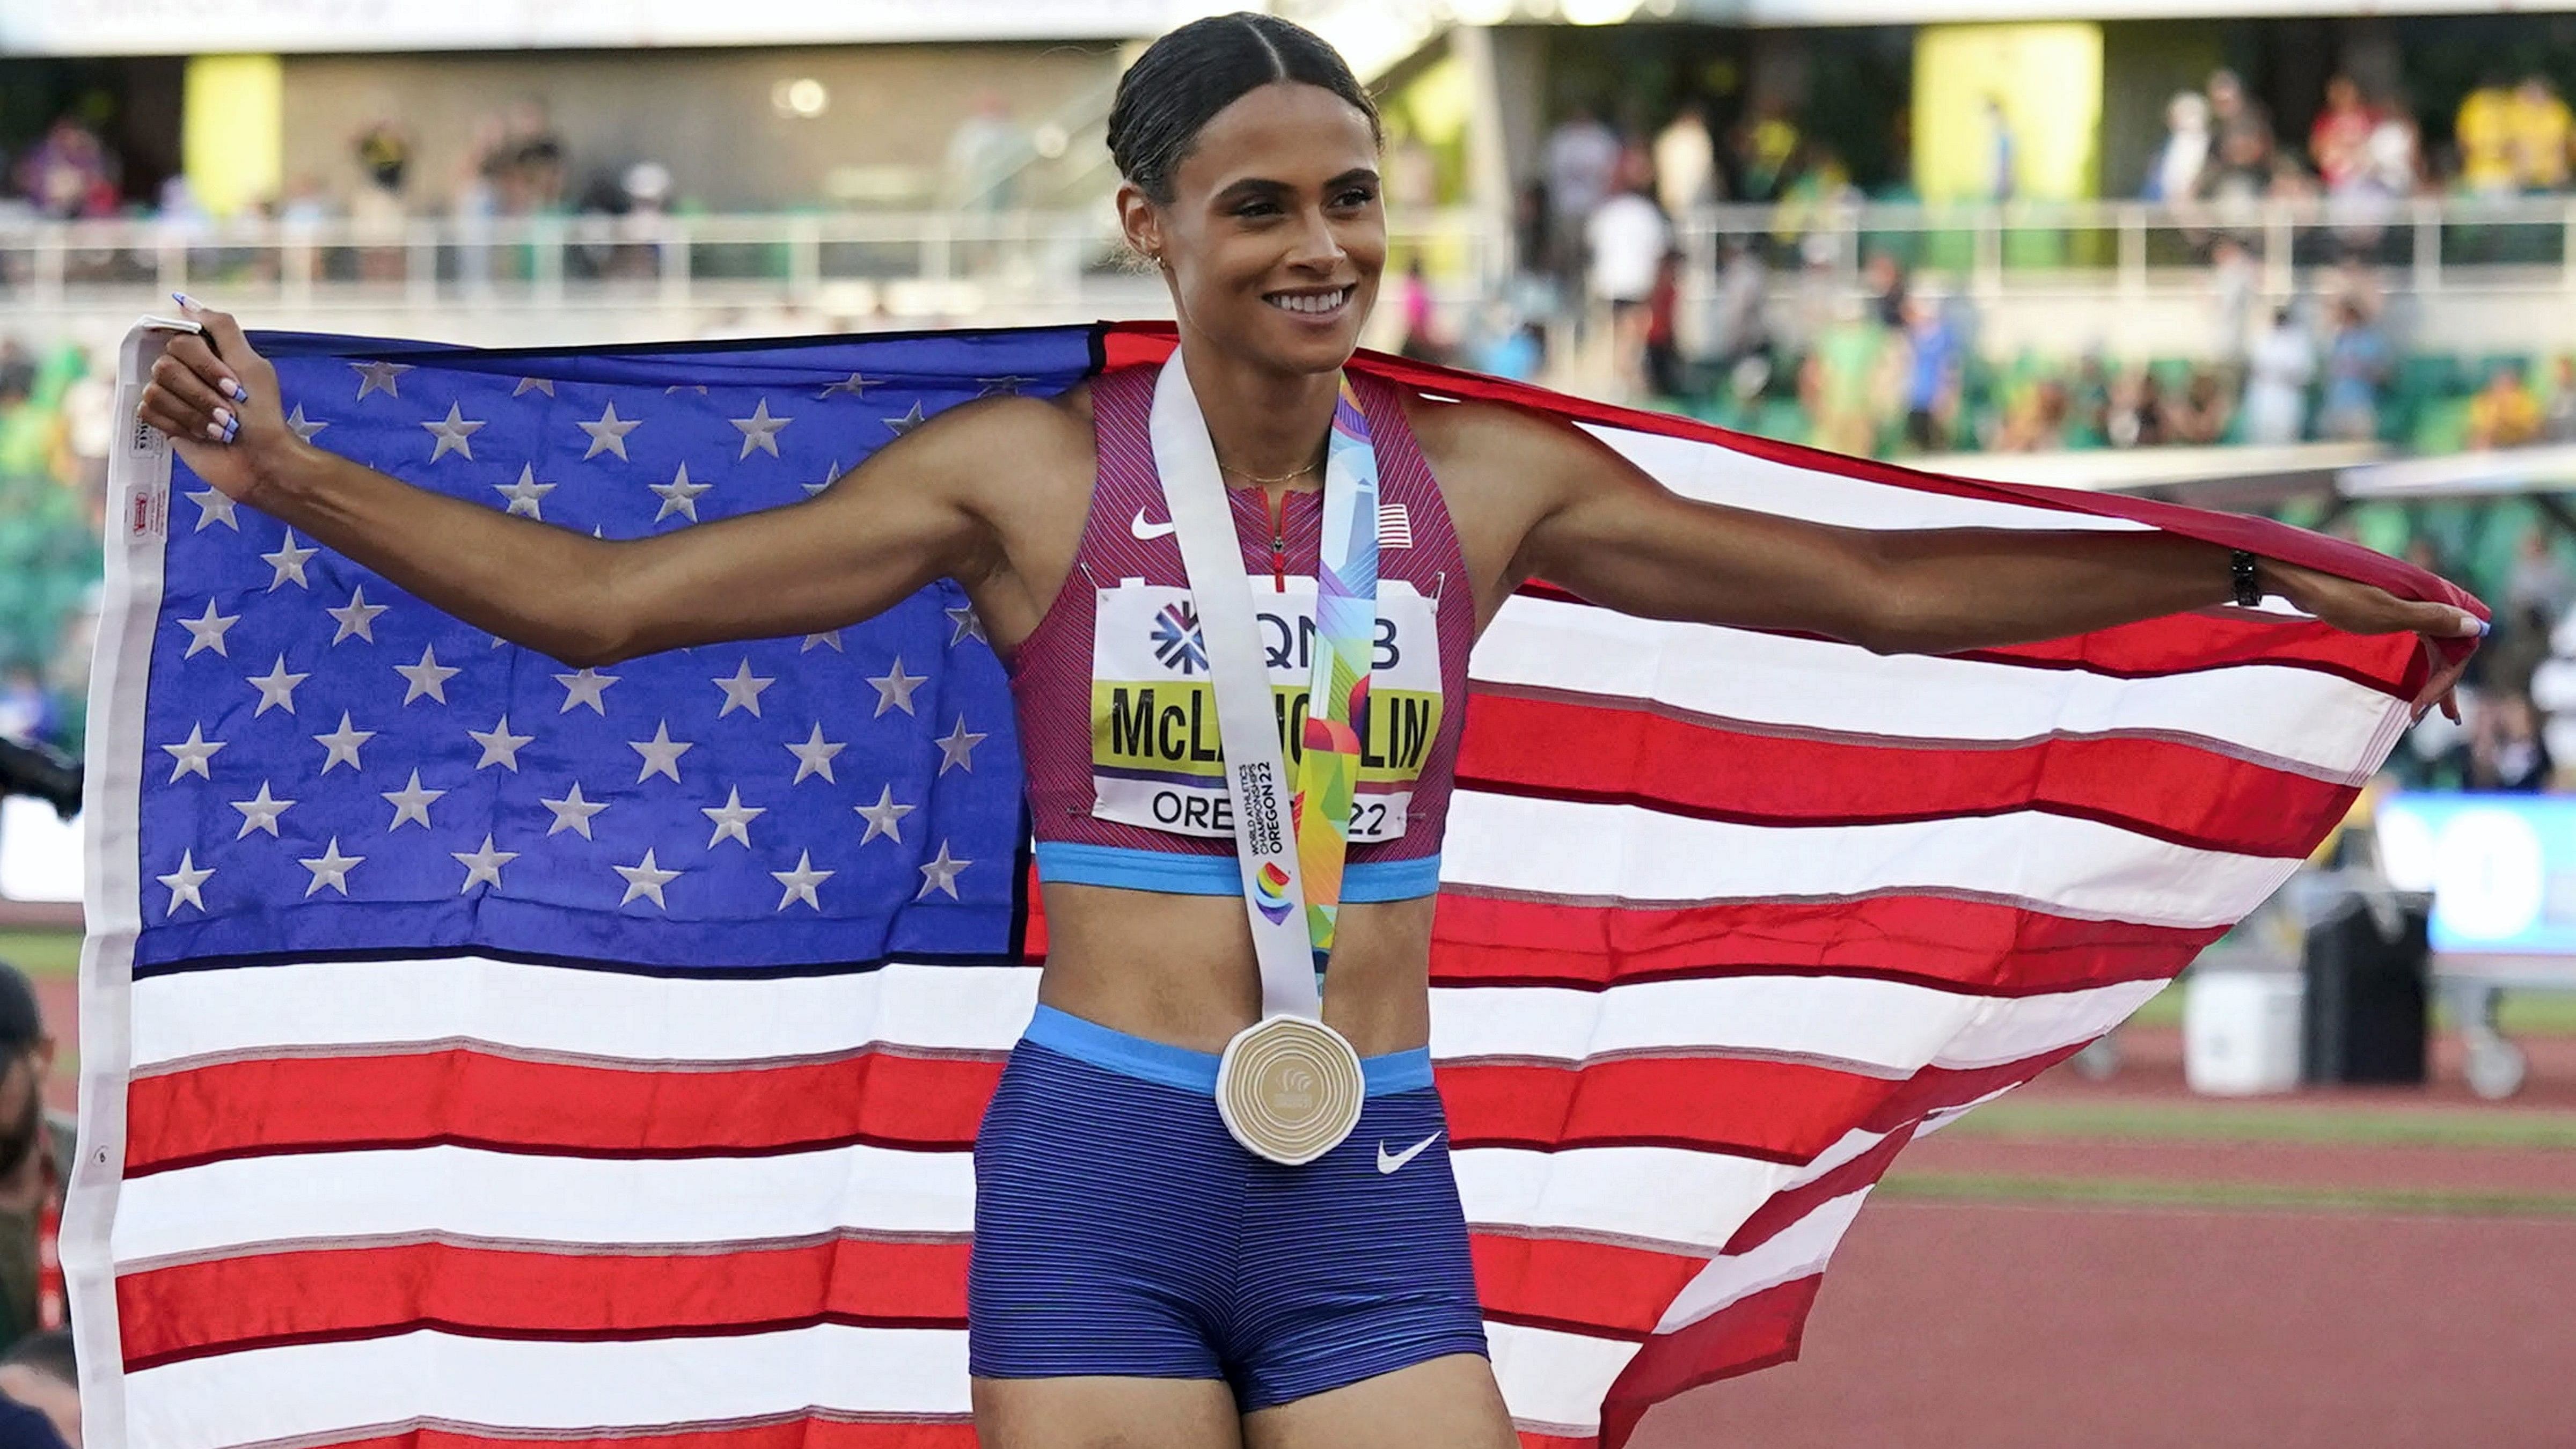 The US track star obliterated her world record at Hayward Field in Eugene to power home in 50.68sec, slicing more than half a second of her previous world mark. Credit: AFP photo